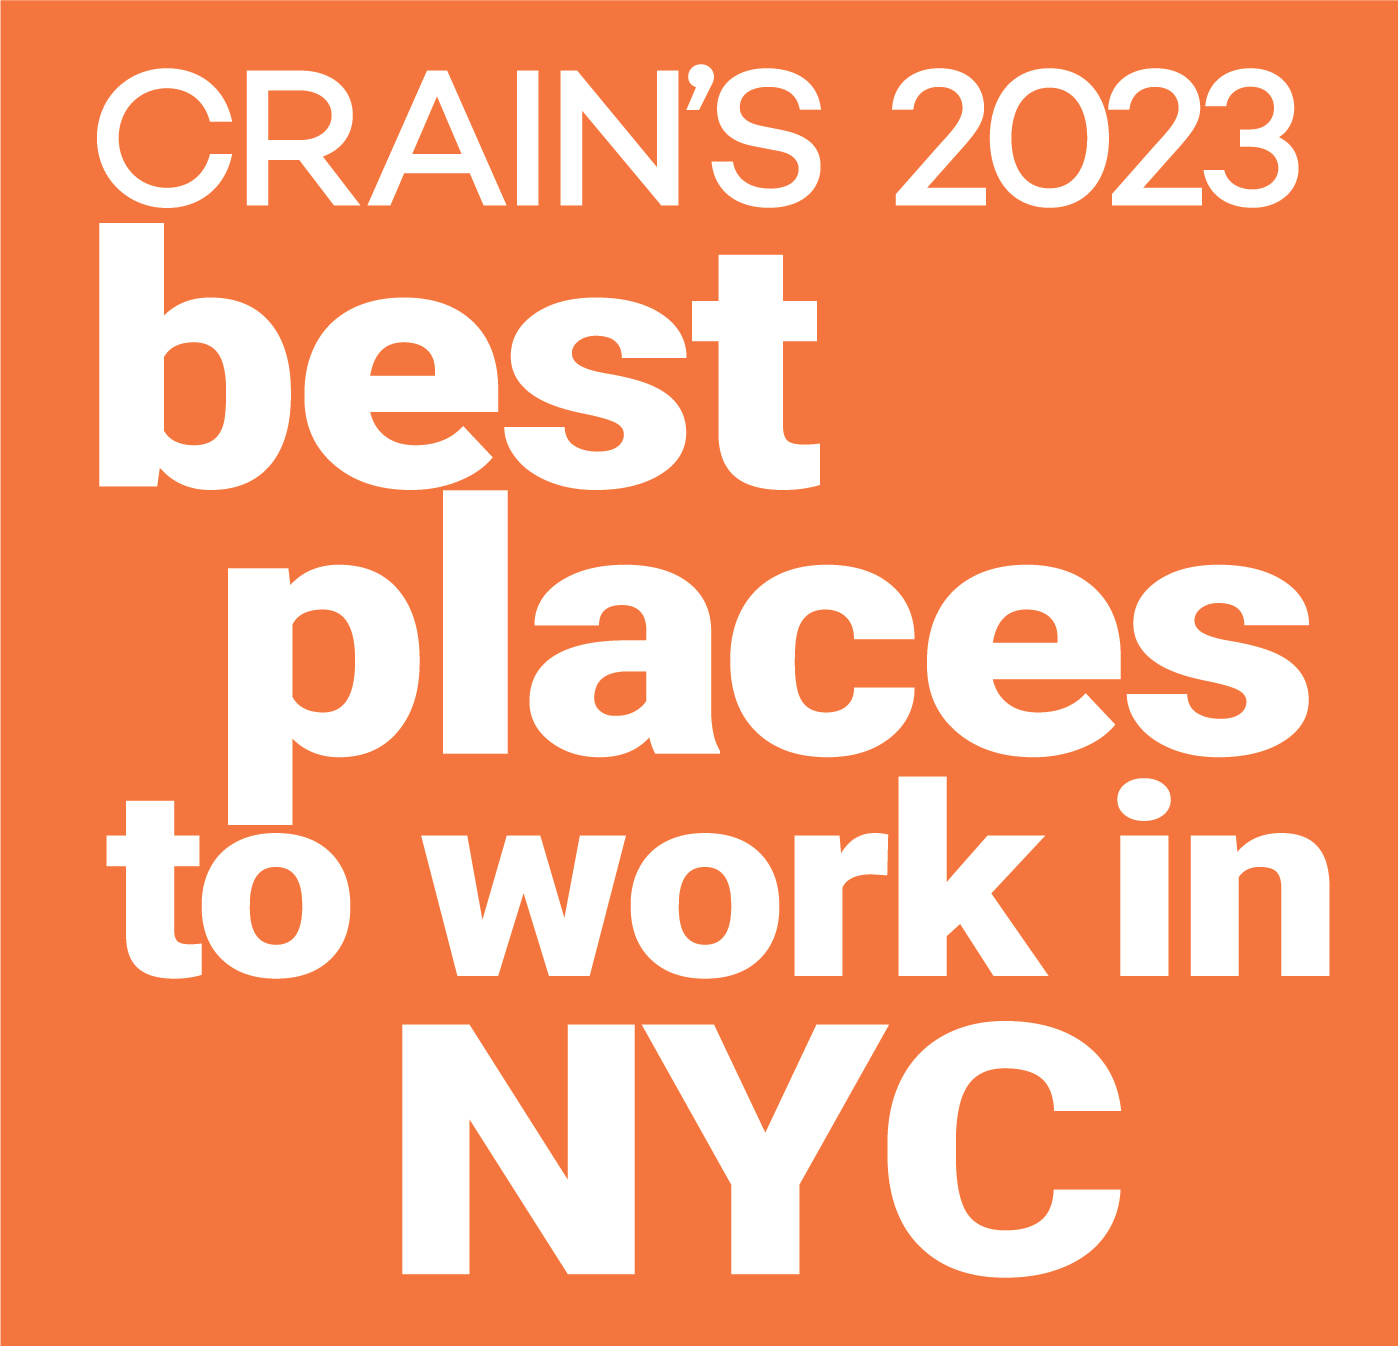 CRAIN'S 2023 best places to work in NYC white text over orange background